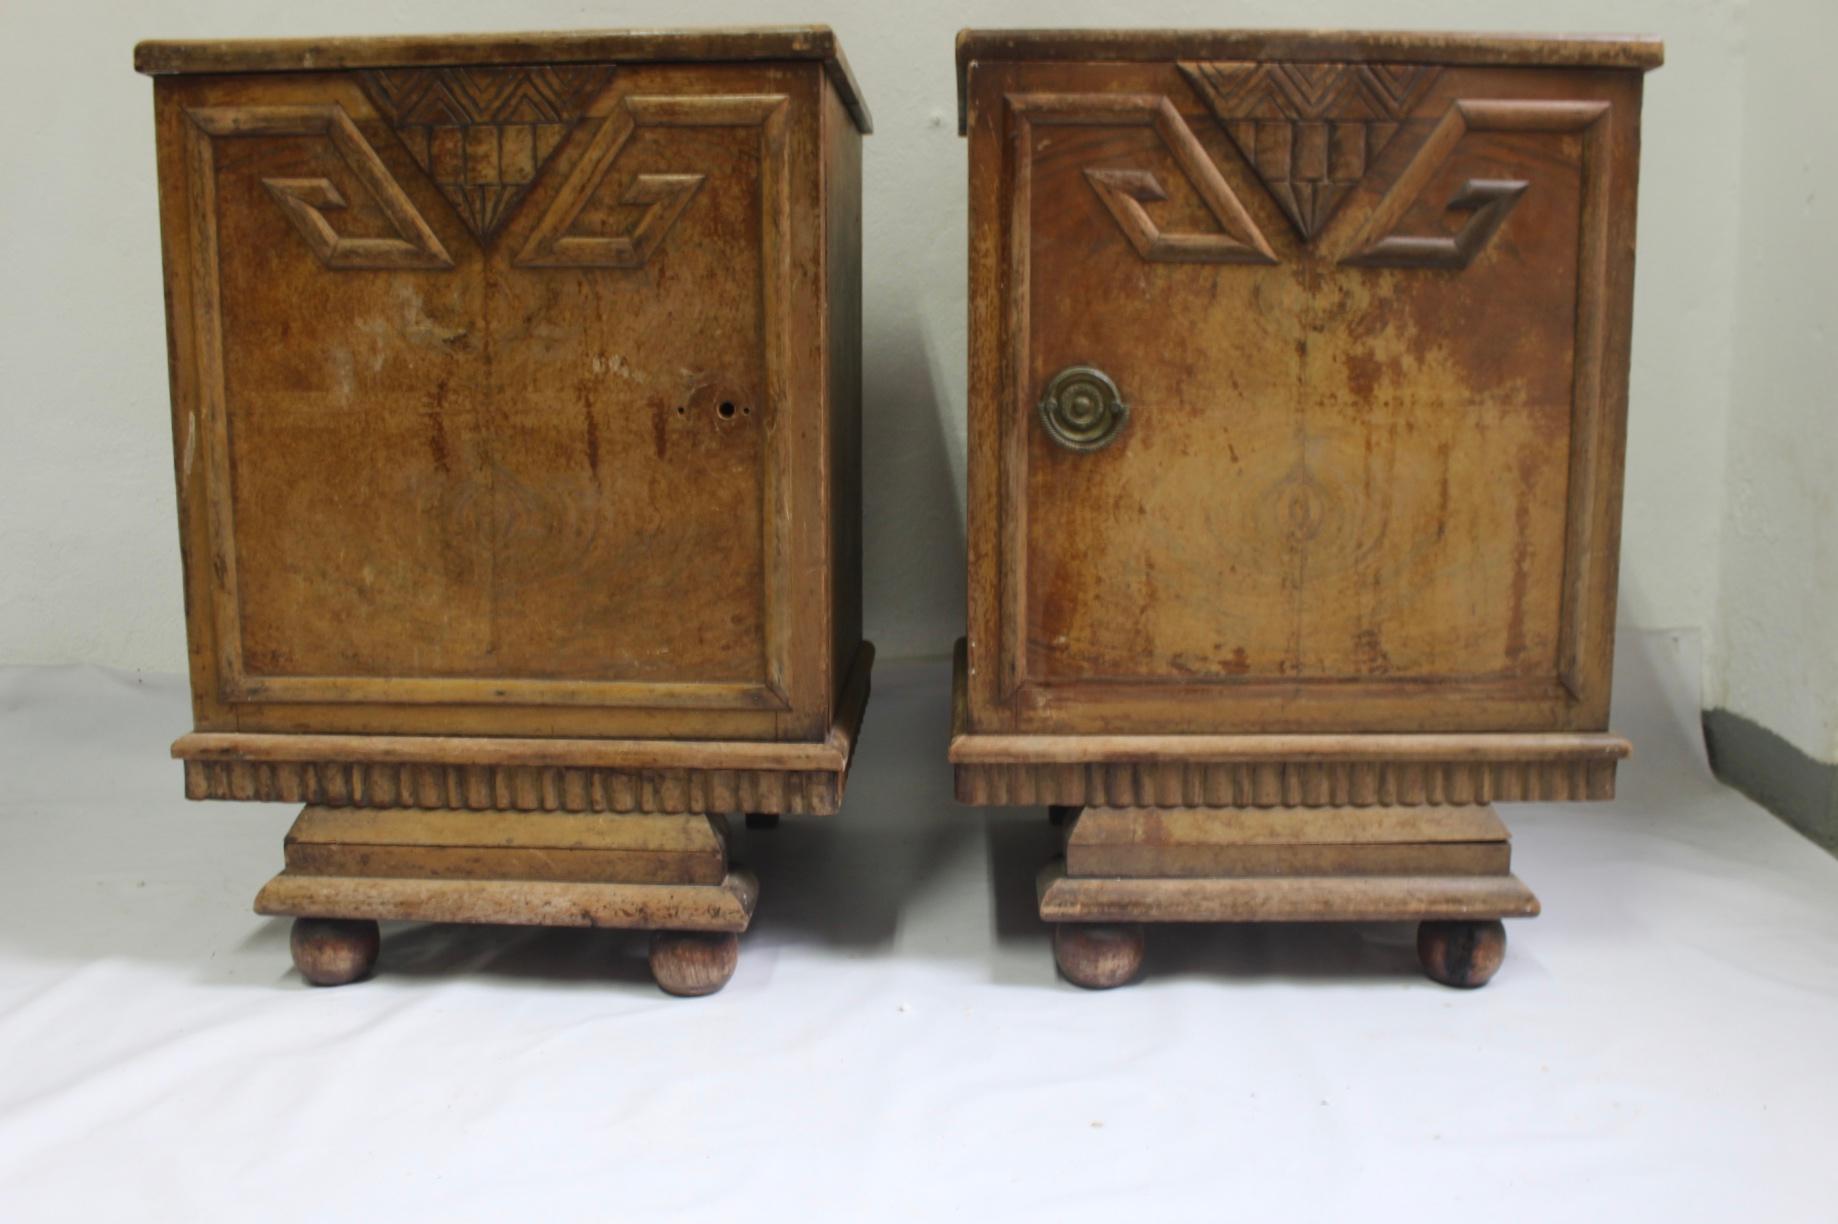 Incredible geometric Art Deco nightstands, Spain, circa 1920s. These beautiful nightstand or side tables are in distressed condition. These are Popular furniture made without expensive materials but without any doubt, beautiful.
The wood of one of